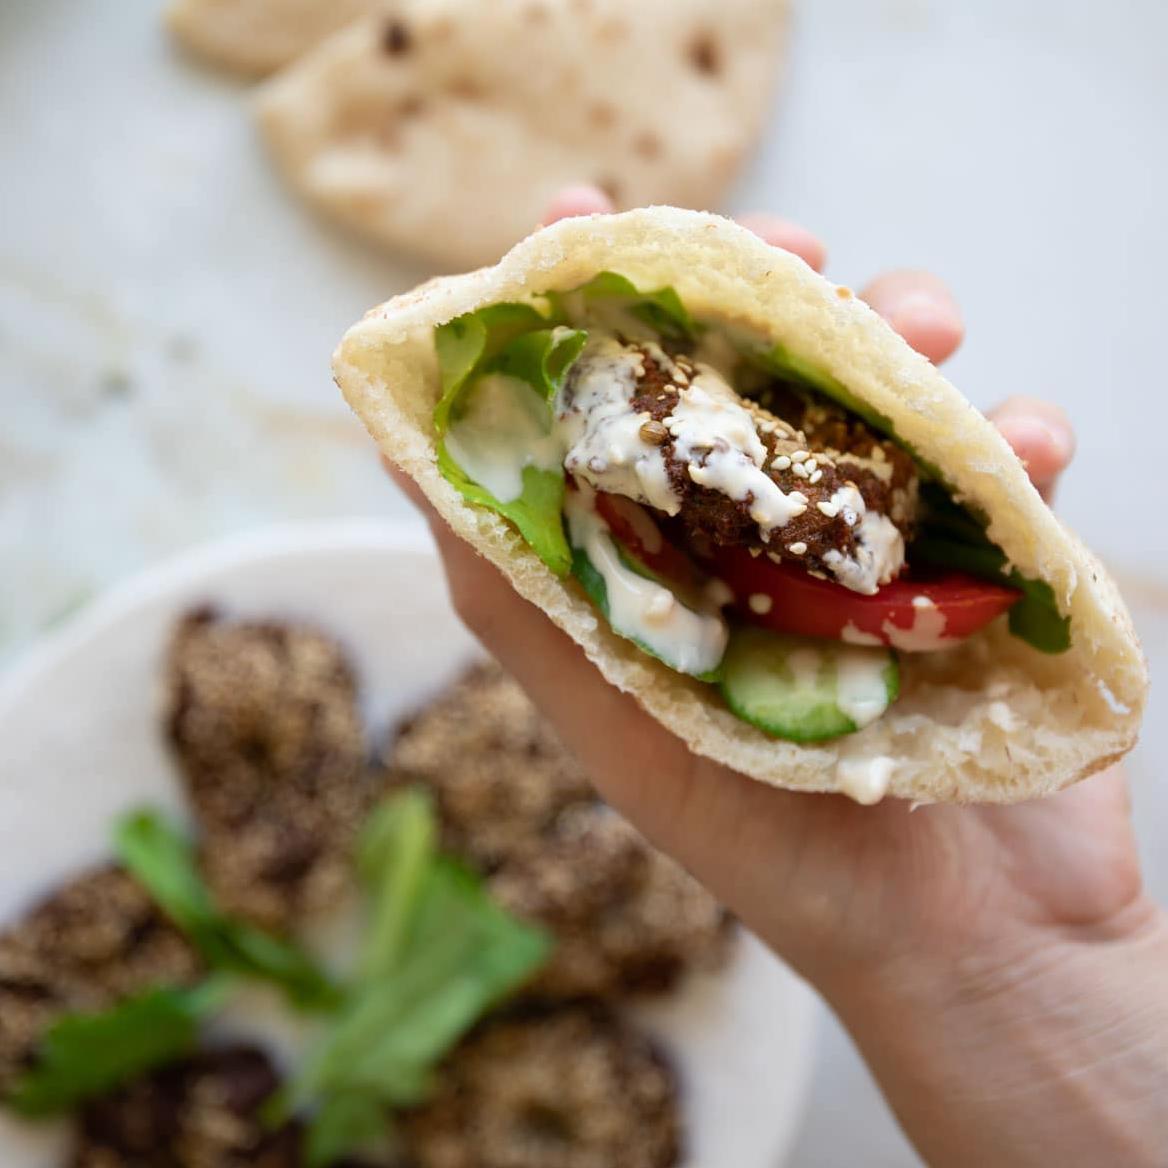 Crispy and Flavorful: Cook Egyptian Falafel at Home